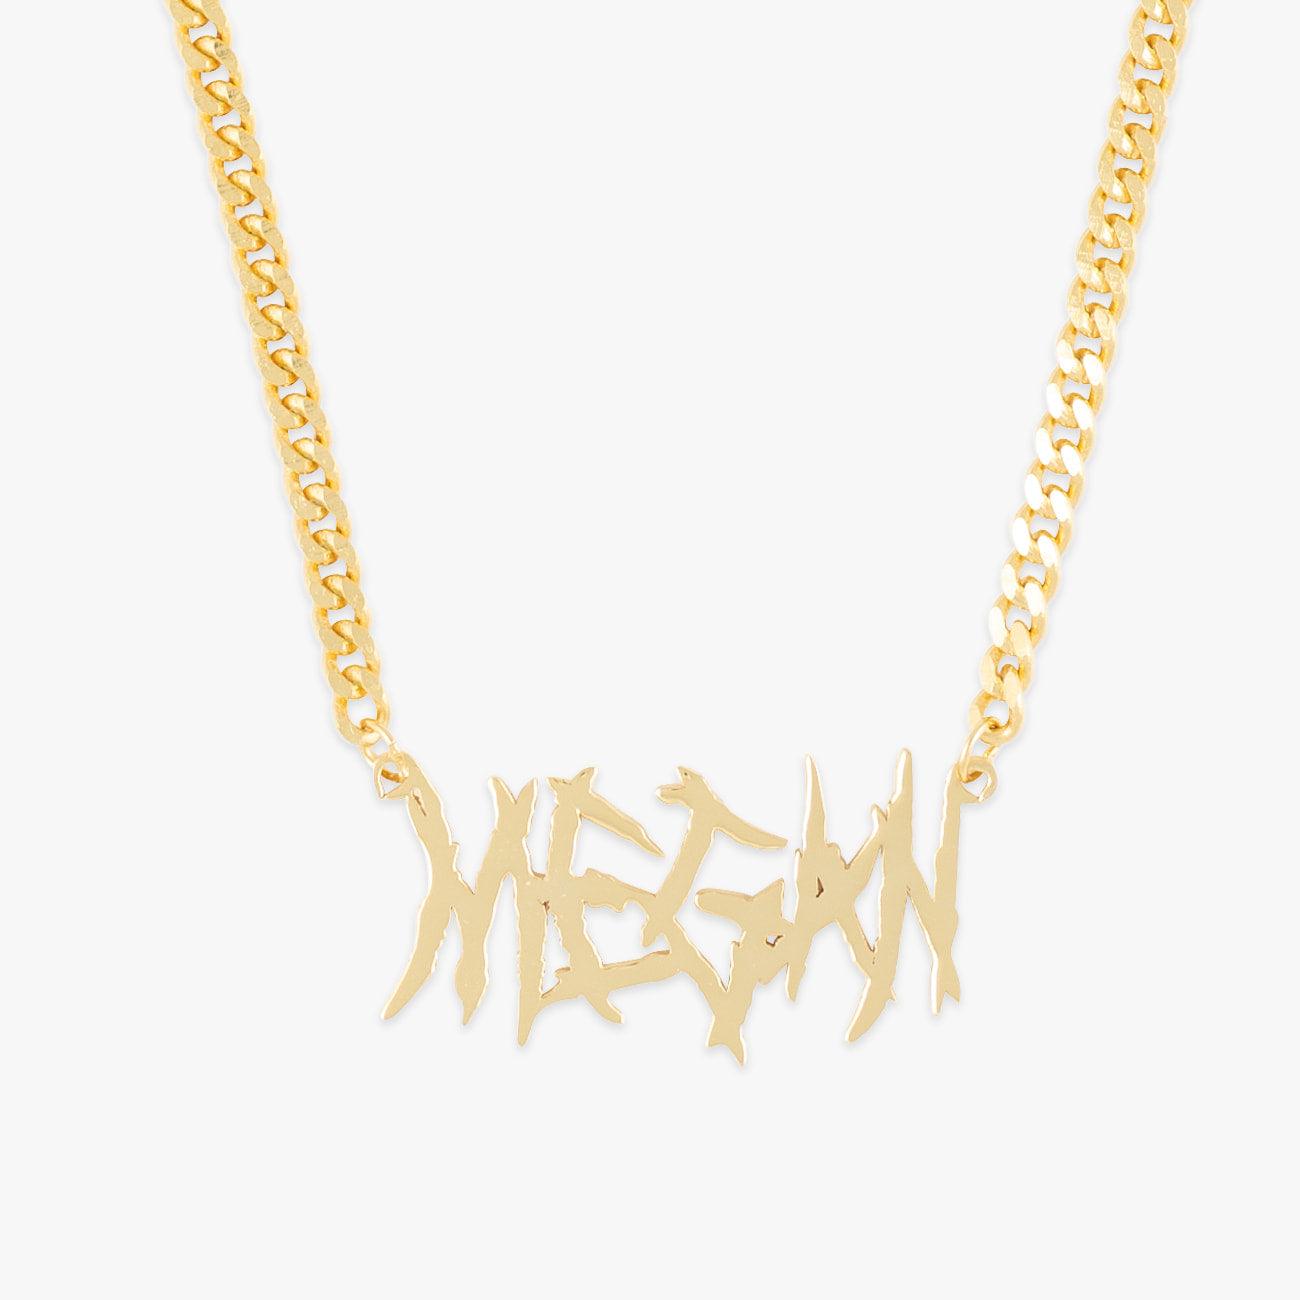 Heavy Metal Name Necklace with Curb Chain  Herzschmuck